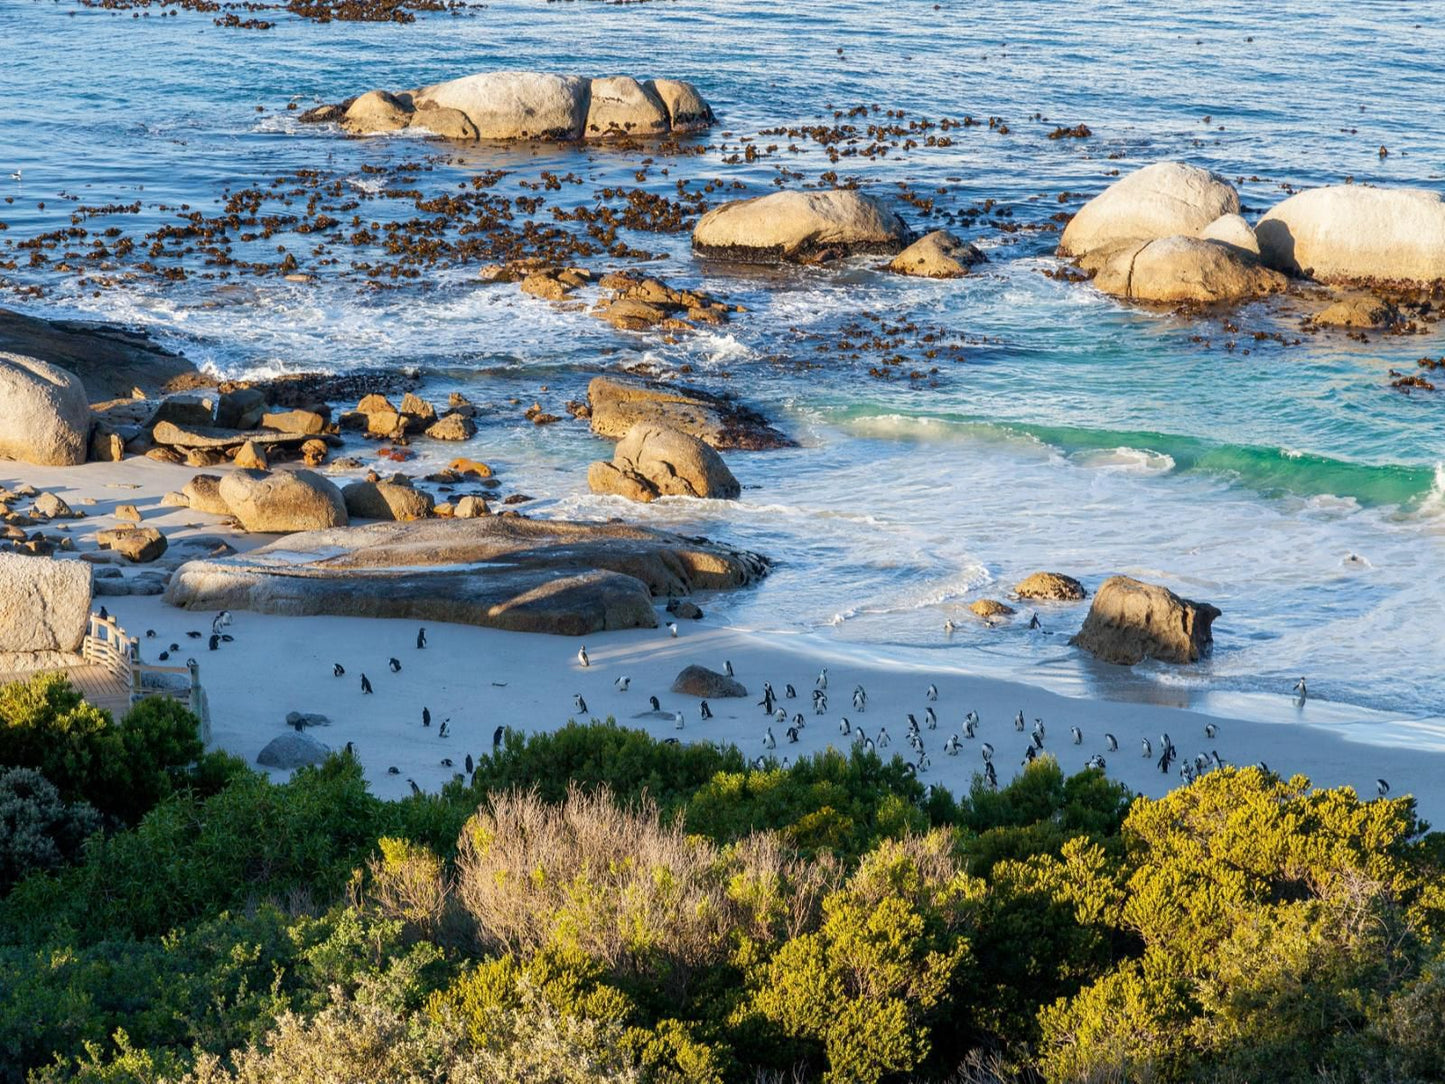 Tintswalo At Boulders The Boulders Cape Town Western Cape South Africa Complementary Colors, Beach, Nature, Sand, Seal, Mammal, Animal, Predator, Ocean, Waters